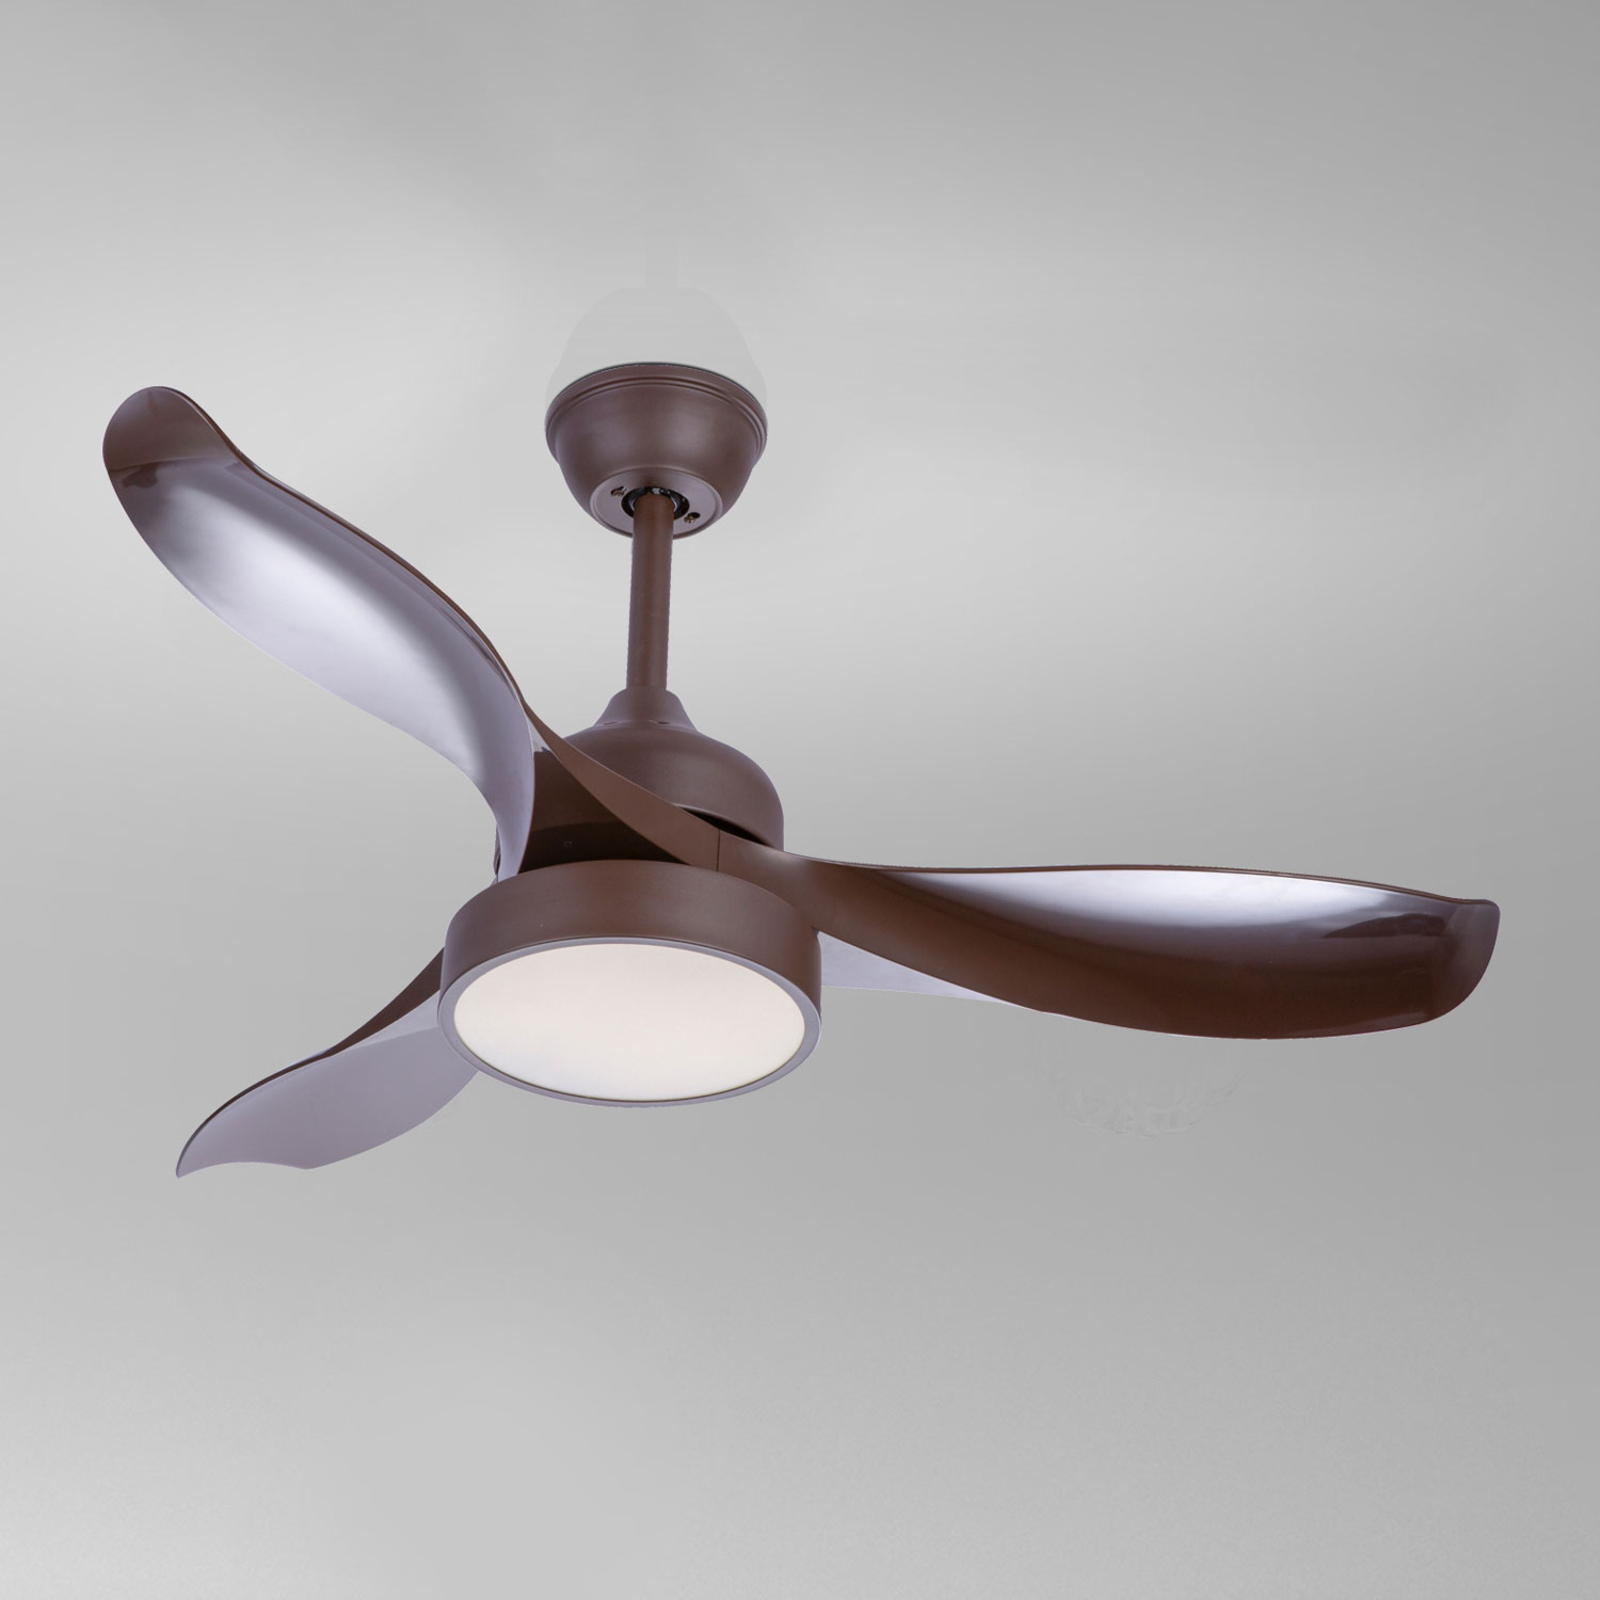 03610 ceiling fan with remote control, brown